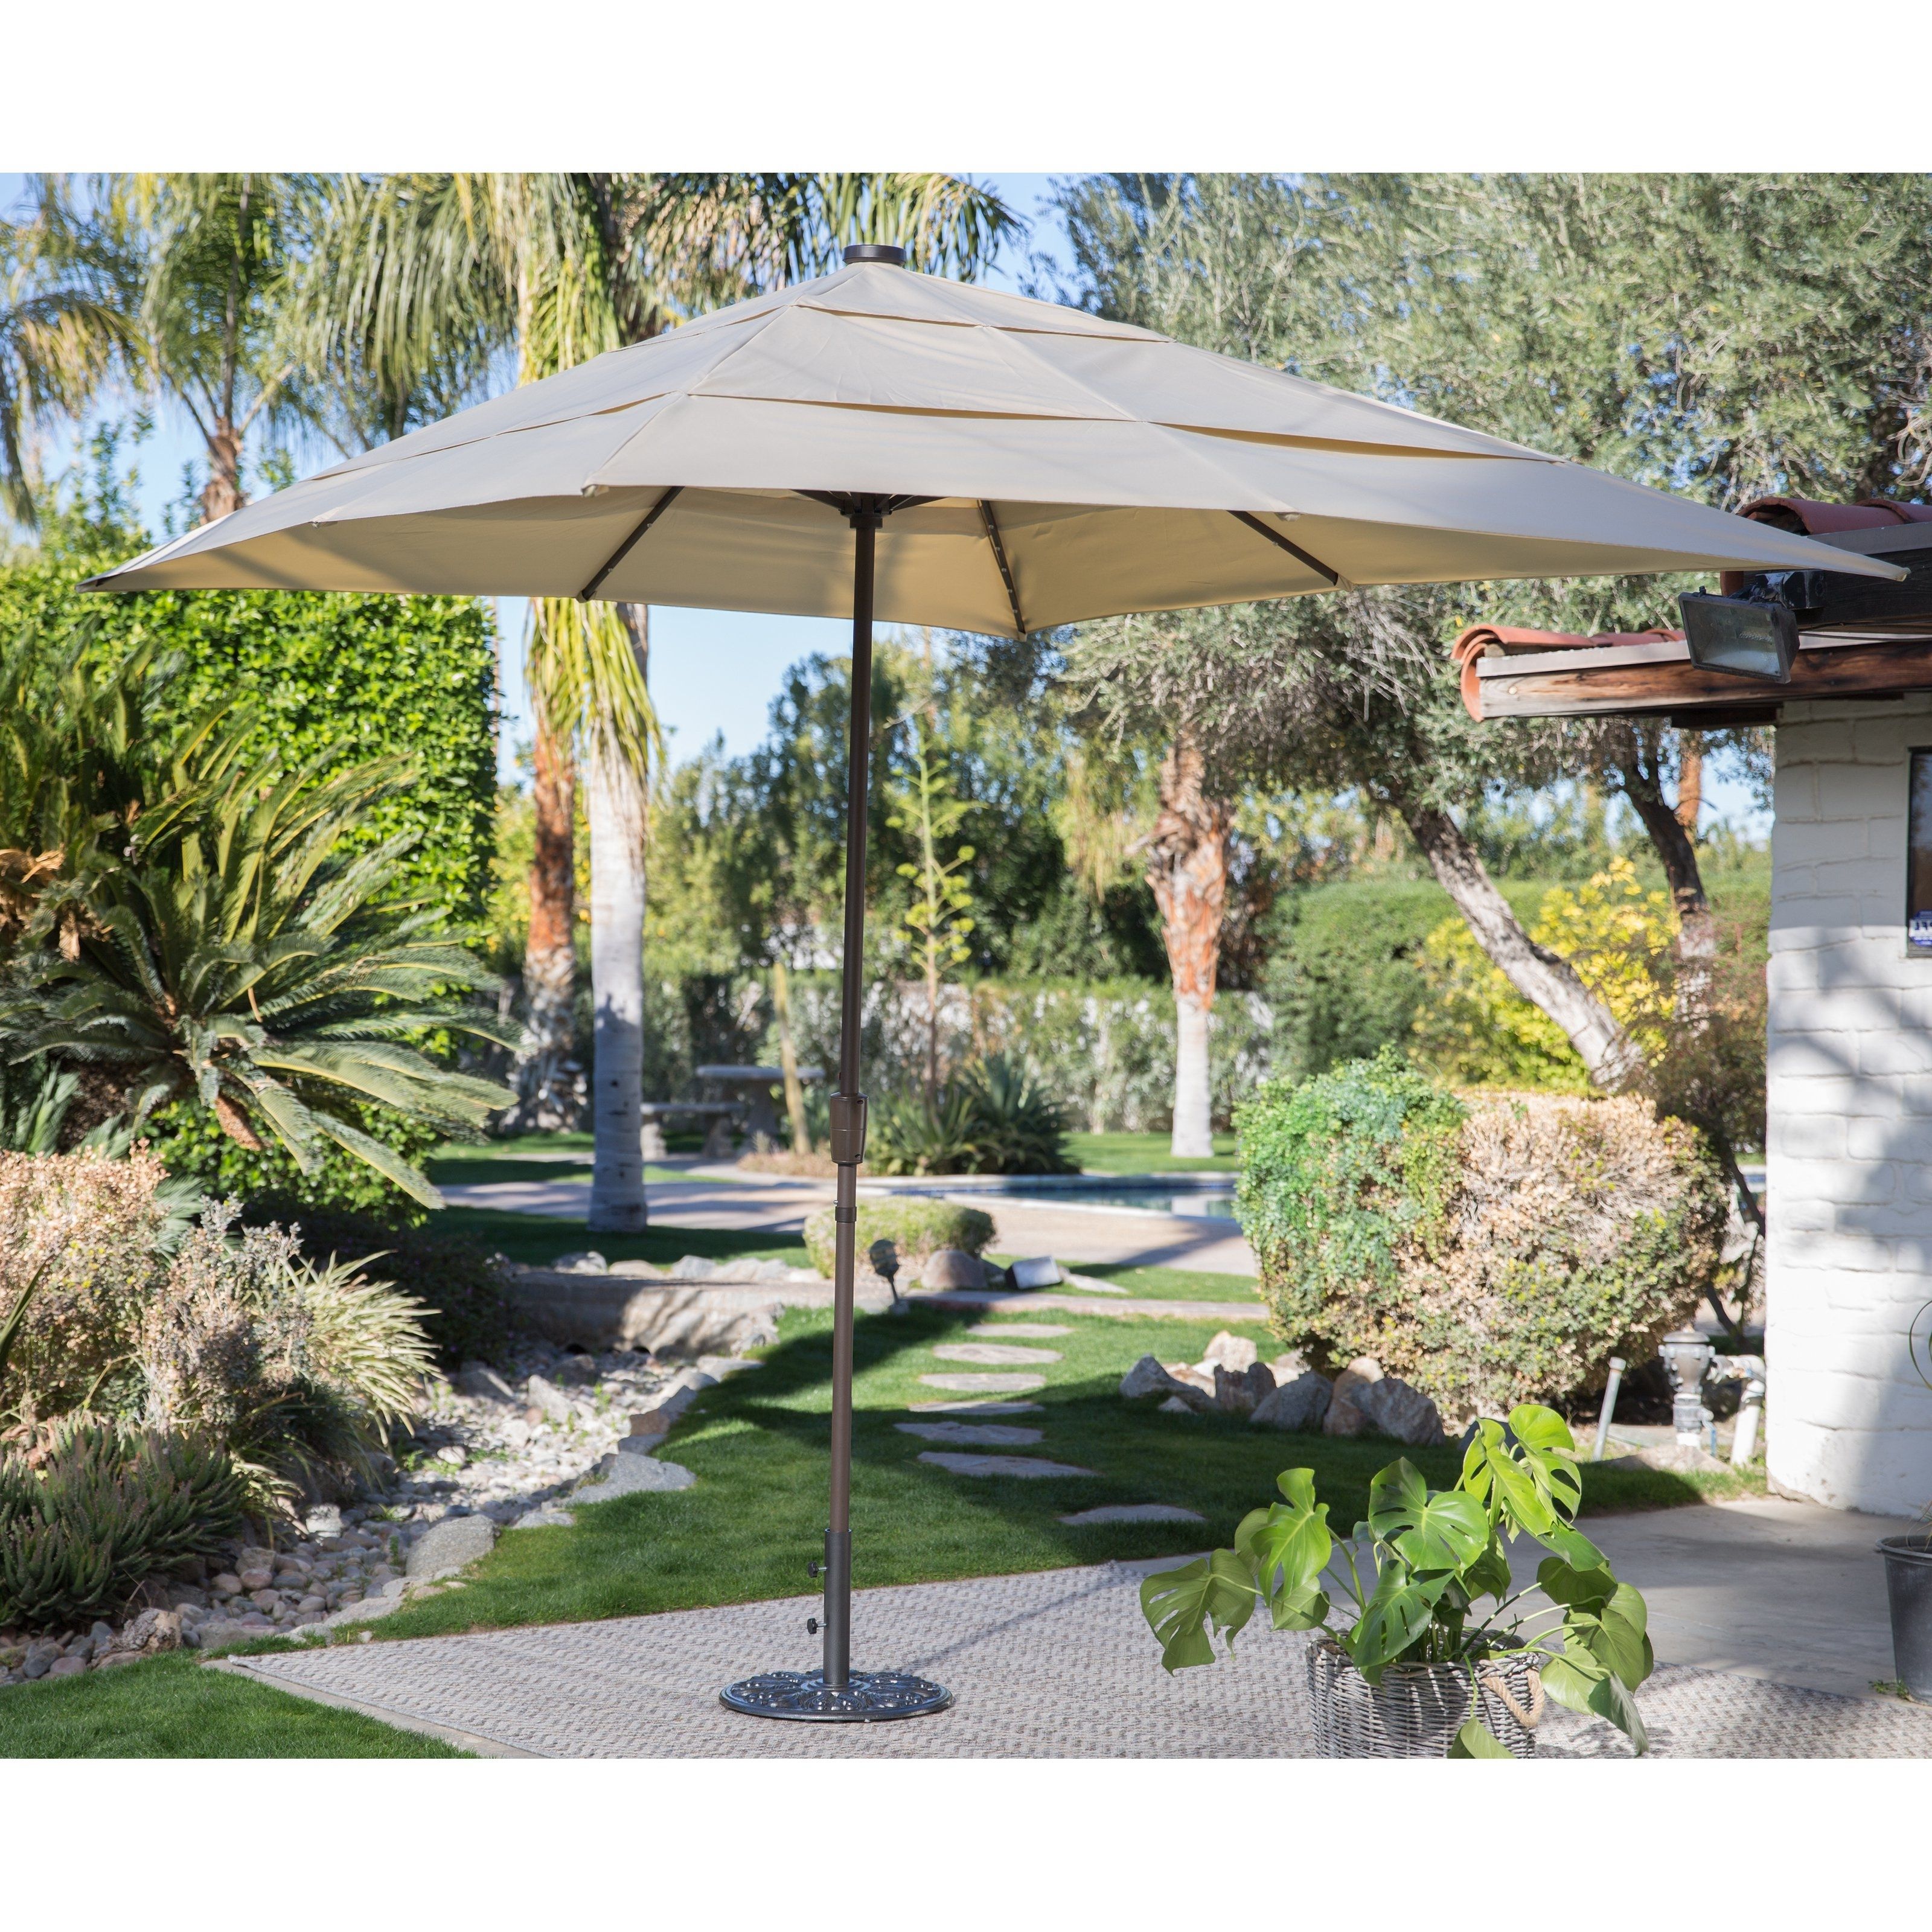 Rectangle Patio Umbrellas Intended For Most Up To Date Coral Coast 8 X 11 Ft (View 17 of 20)